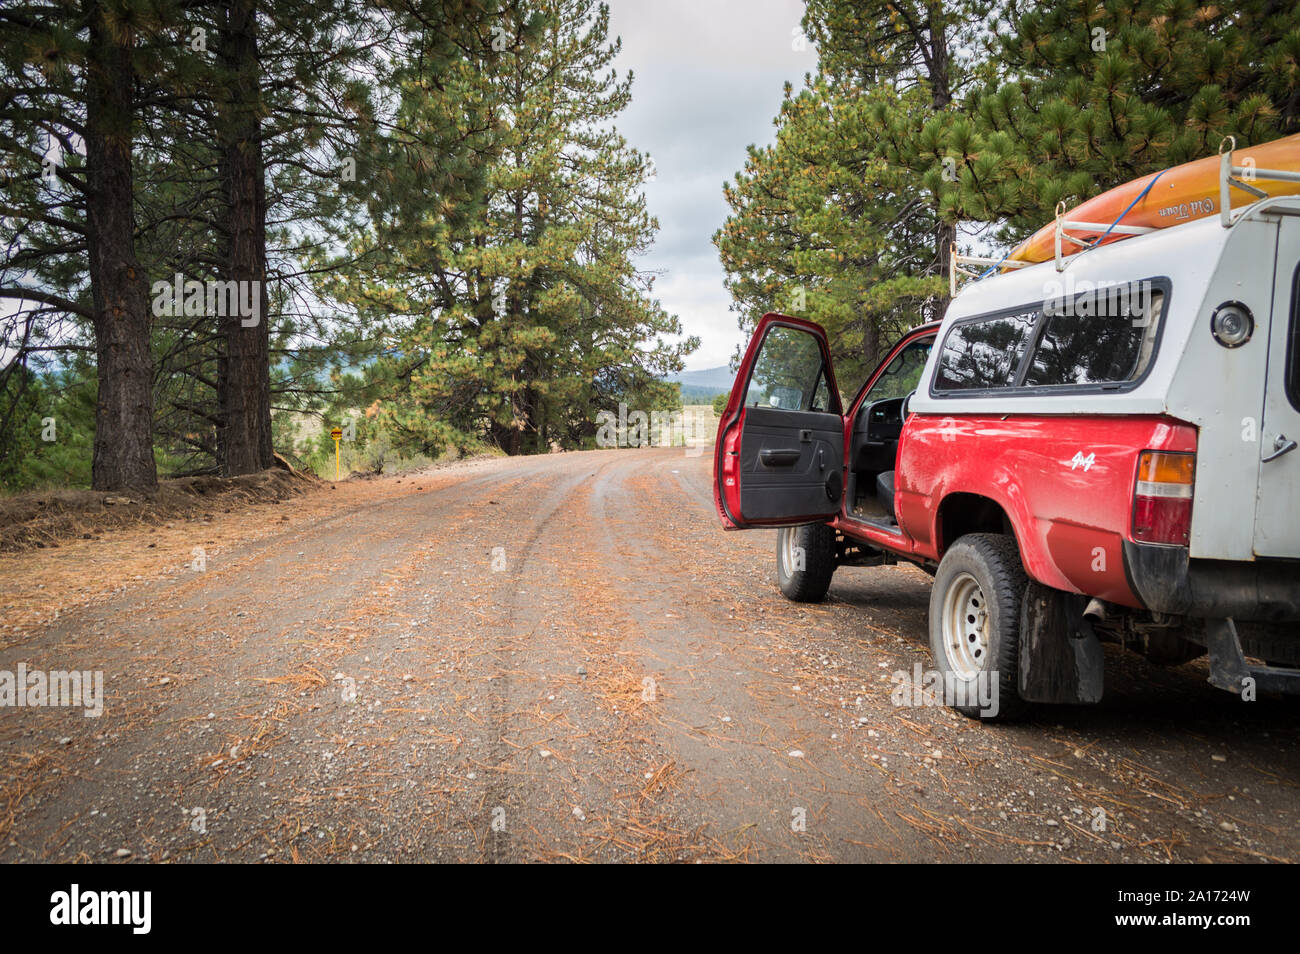 Truckee, California / USA - Sept 08 2019: A four wheel drive camper truck parked on the side of a dirt road leading into a forest. Stock Photo